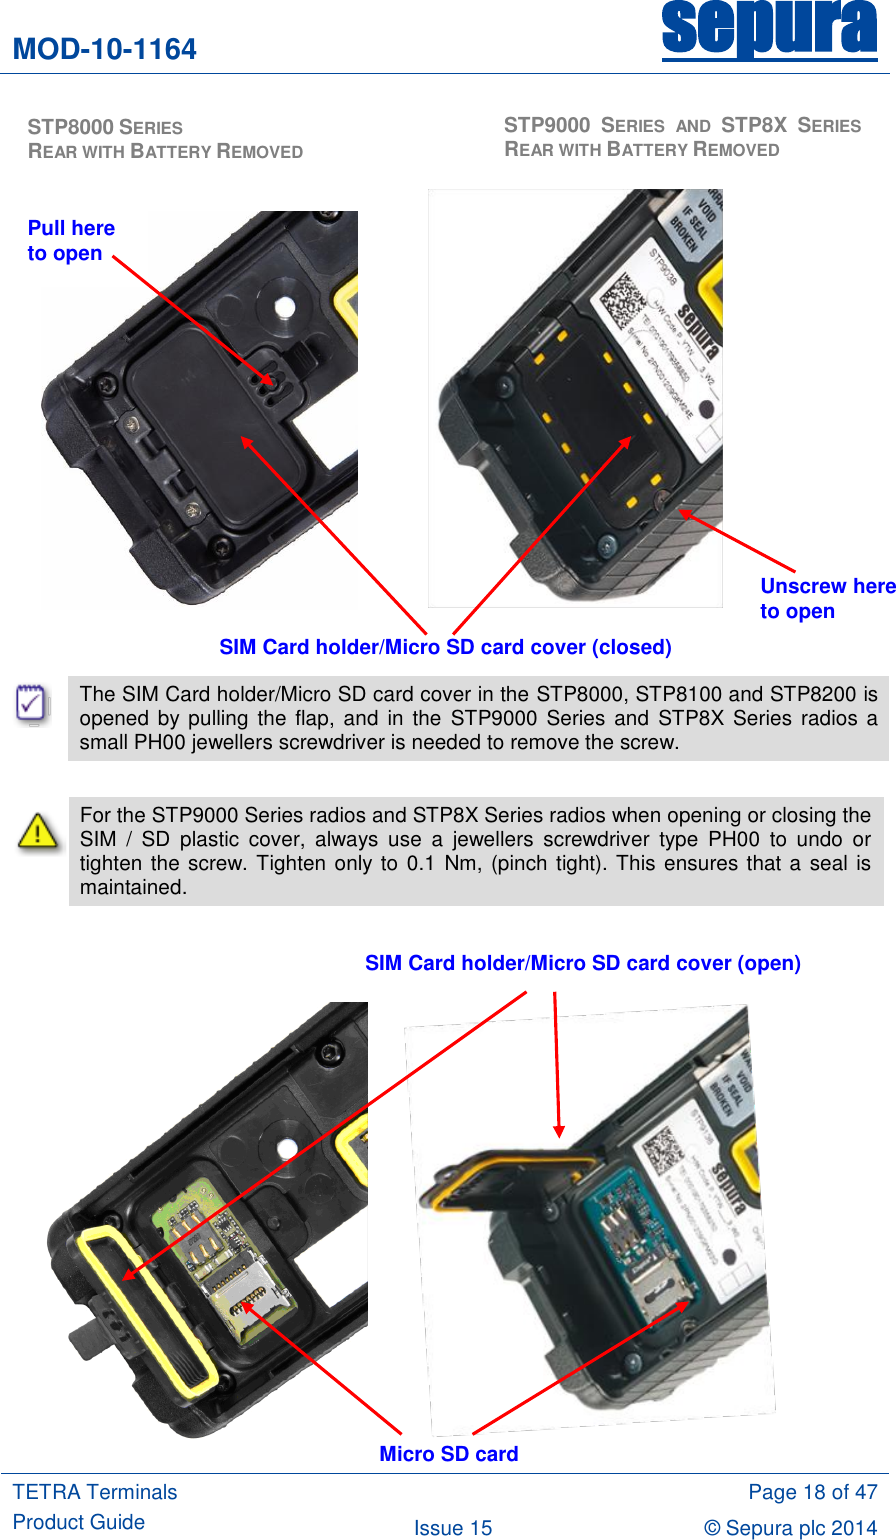 MOD-10-1164 sepura  TETRA Terminals Product Guide  Page 18 of 47 Issue 15 © Sepura plc 2014                                    The SIM Card holder/Micro SD card cover in the STP8000, STP8100 and STP8200 is opened  by pulling  the  flap, and  in the  STP9000  Series and  STP8X  Series  radios a small PH00 jewellers screwdriver is needed to remove the screw.   For the STP9000 Series radios and STP8X Series radios when opening or closing the SIM  /  SD  plastic  cover,  always  use  a  jewellers  screwdriver  type  PH00  to  undo  or tighten the screw. Tighten only to 0.1 Nm, (pinch tight). This ensures that a seal is maintained.                SIM Card holder/Micro SD card cover (closed) SIM Card holder/Micro SD card cover (open) Micro SD card  STP8000 SERIES                            REAR WITH BATTERY REMOVED  STP9000 SERIES  AND  STP8X SERIES REAR WITH BATTERY REMOVED Unscrew here to open Pull here to open 